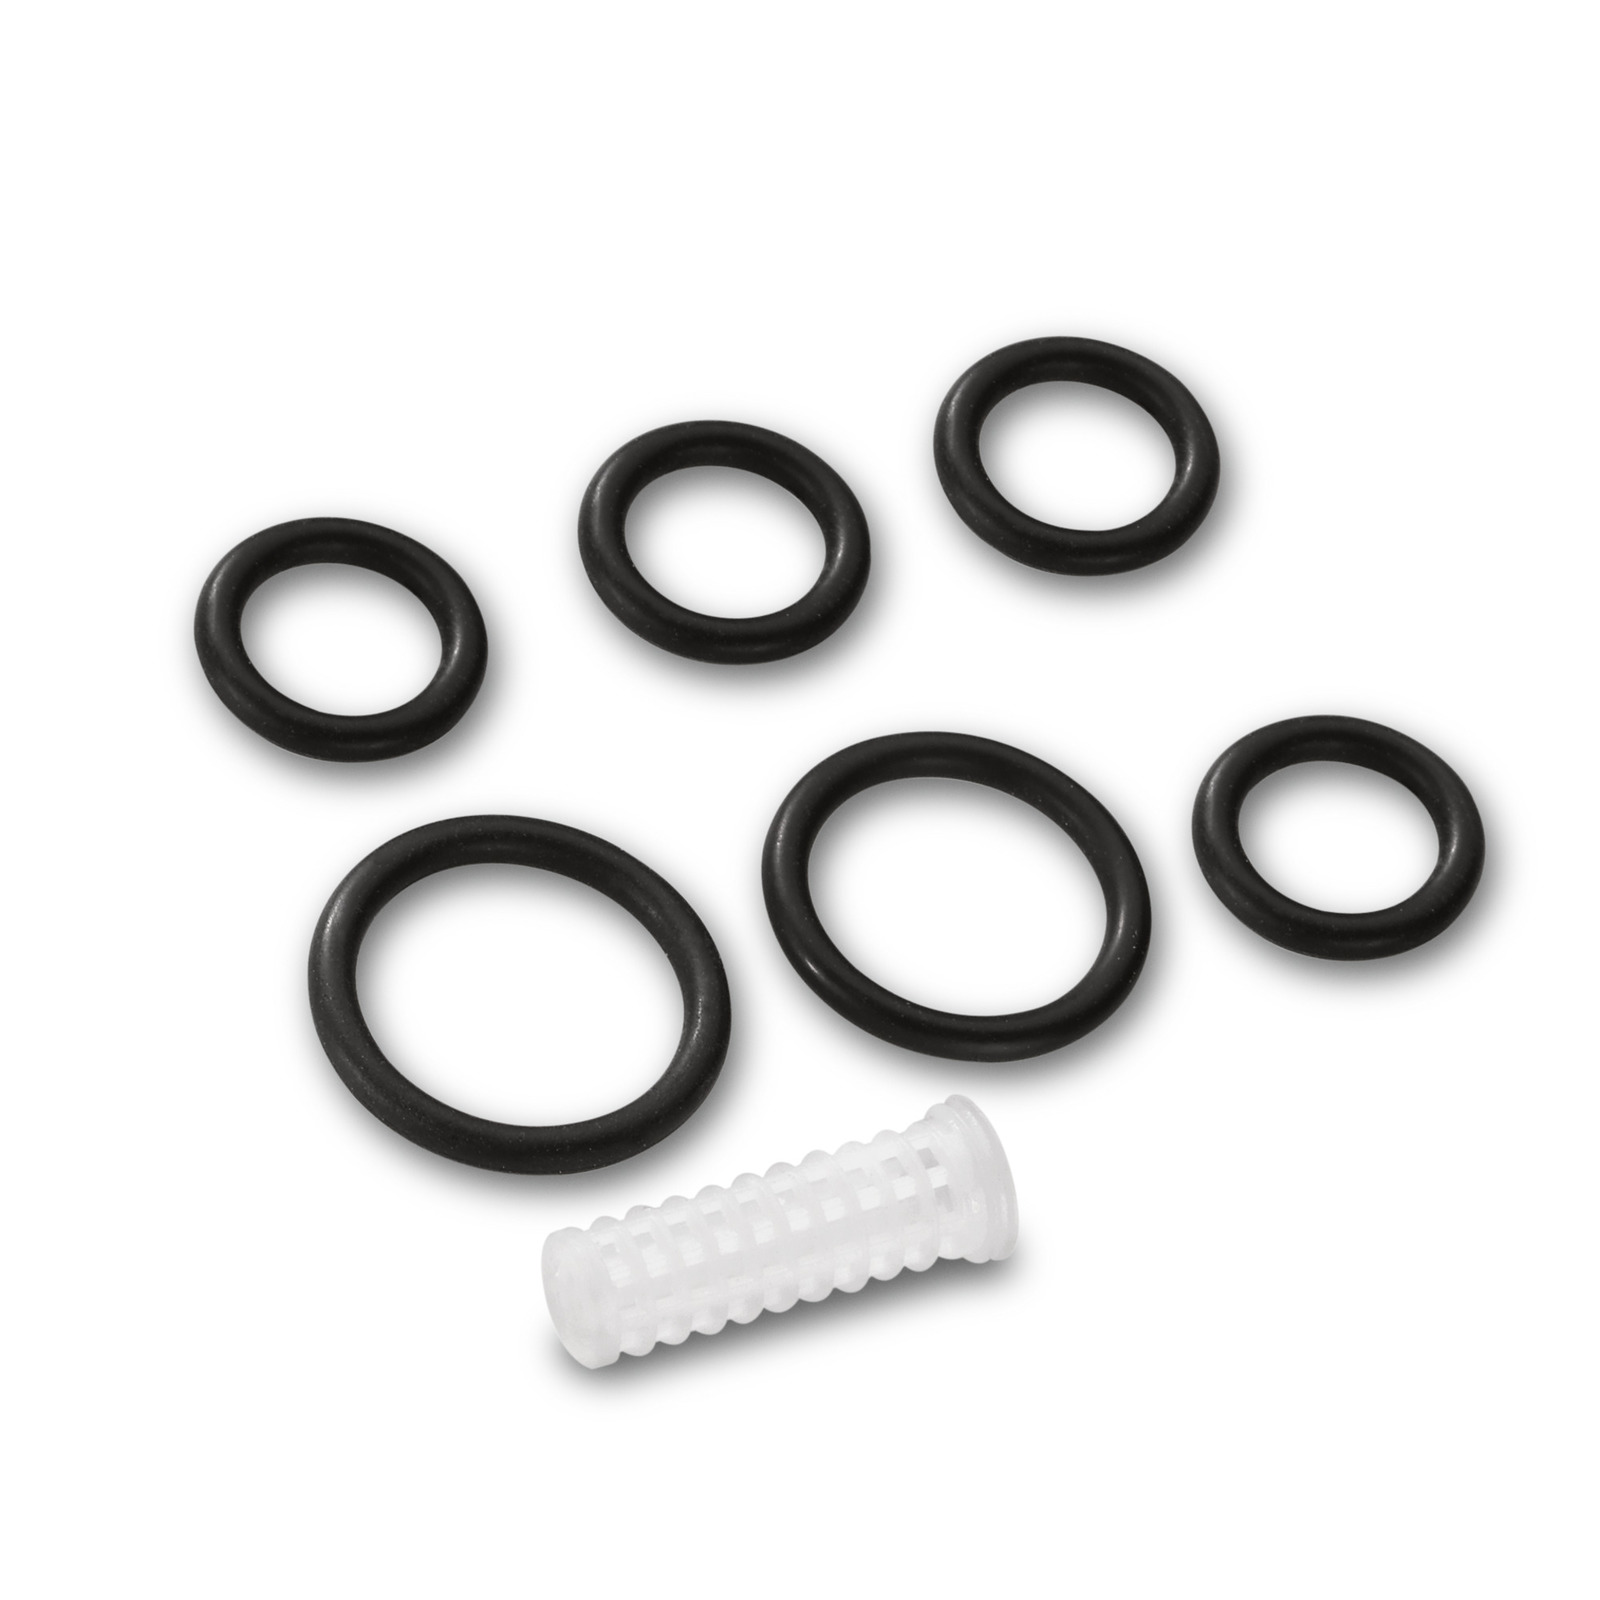 2.880-154.0 Karcher 3 PACK O-RINGS FOR KARCHER HOSES AND WAND FITTINGS